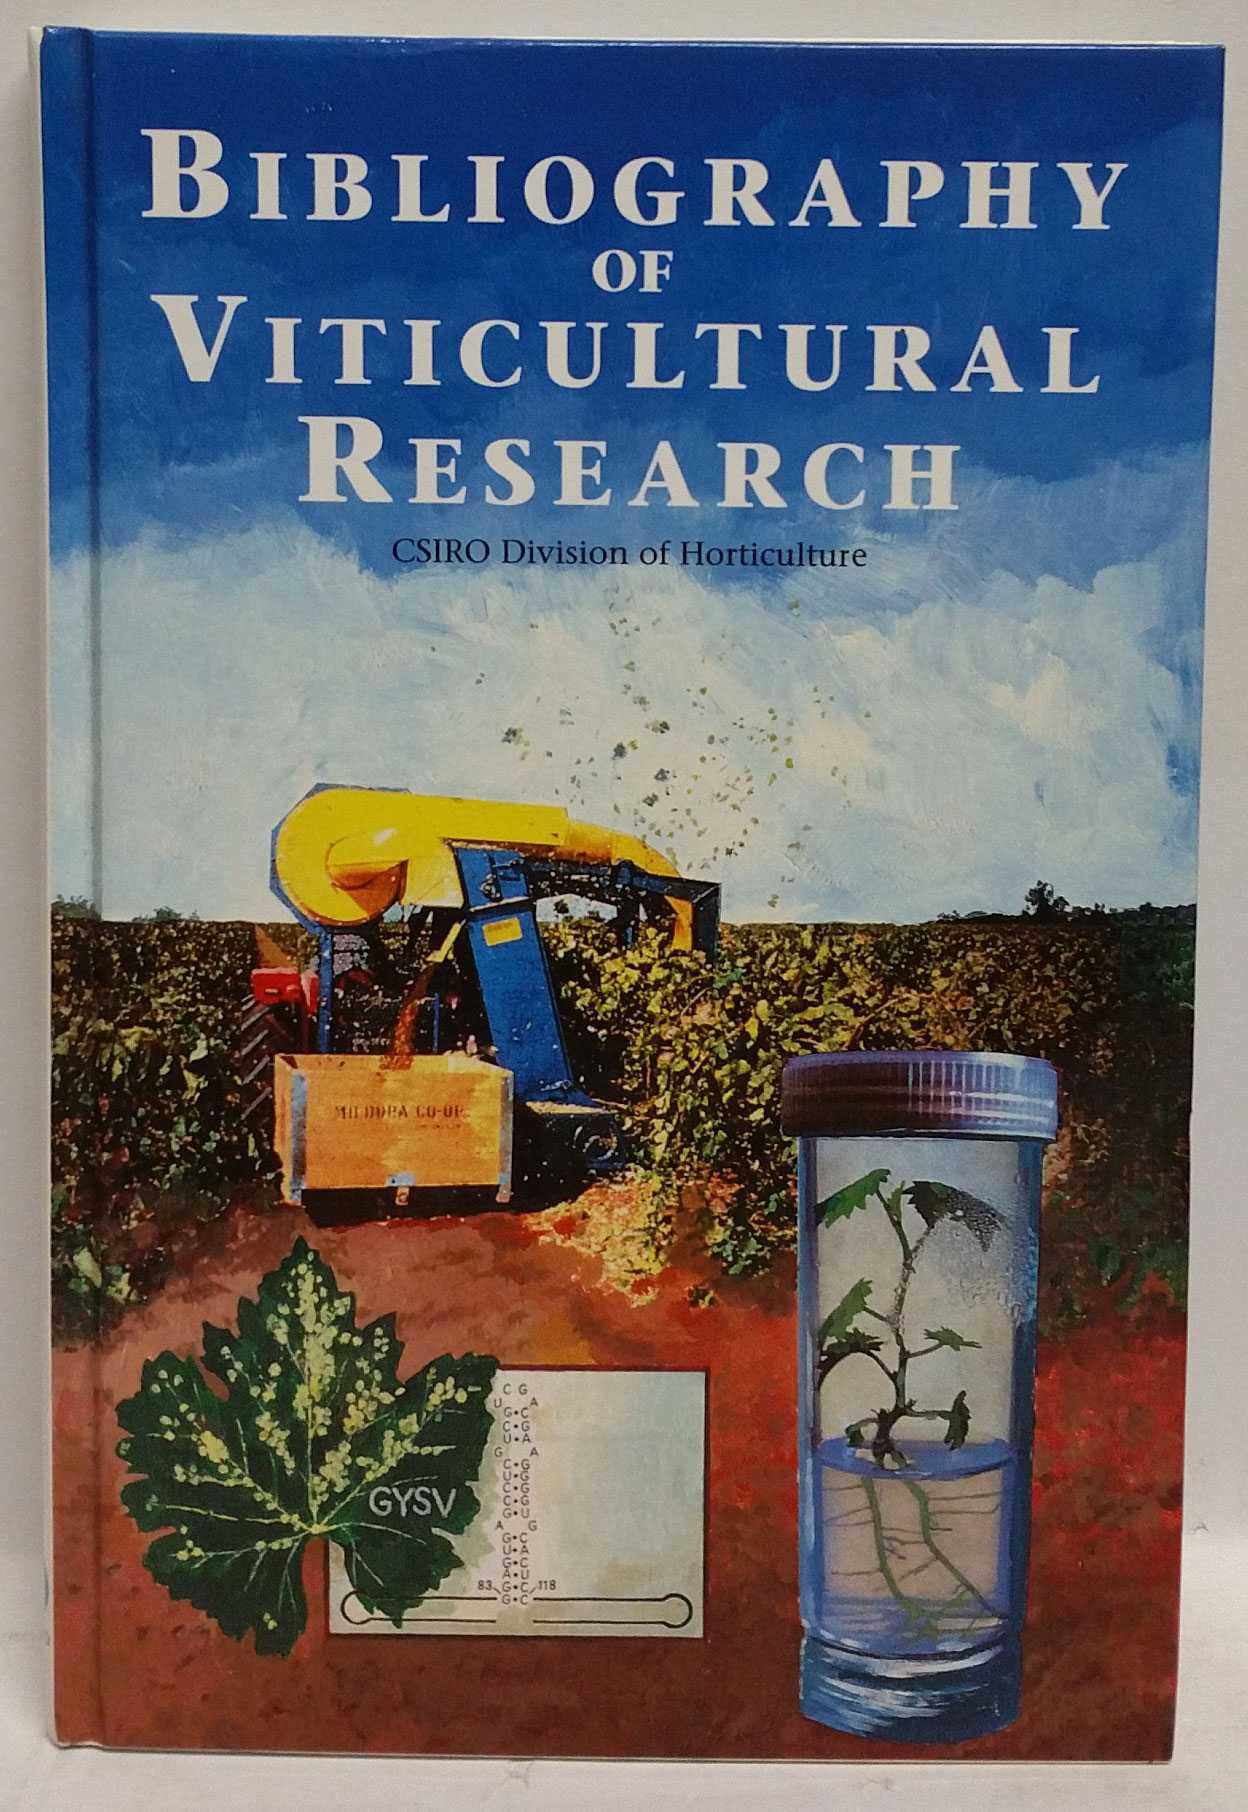 J. V. Possingham; R. Wren Smith; A.M. Brennan - Bibliography of Viticultural Research